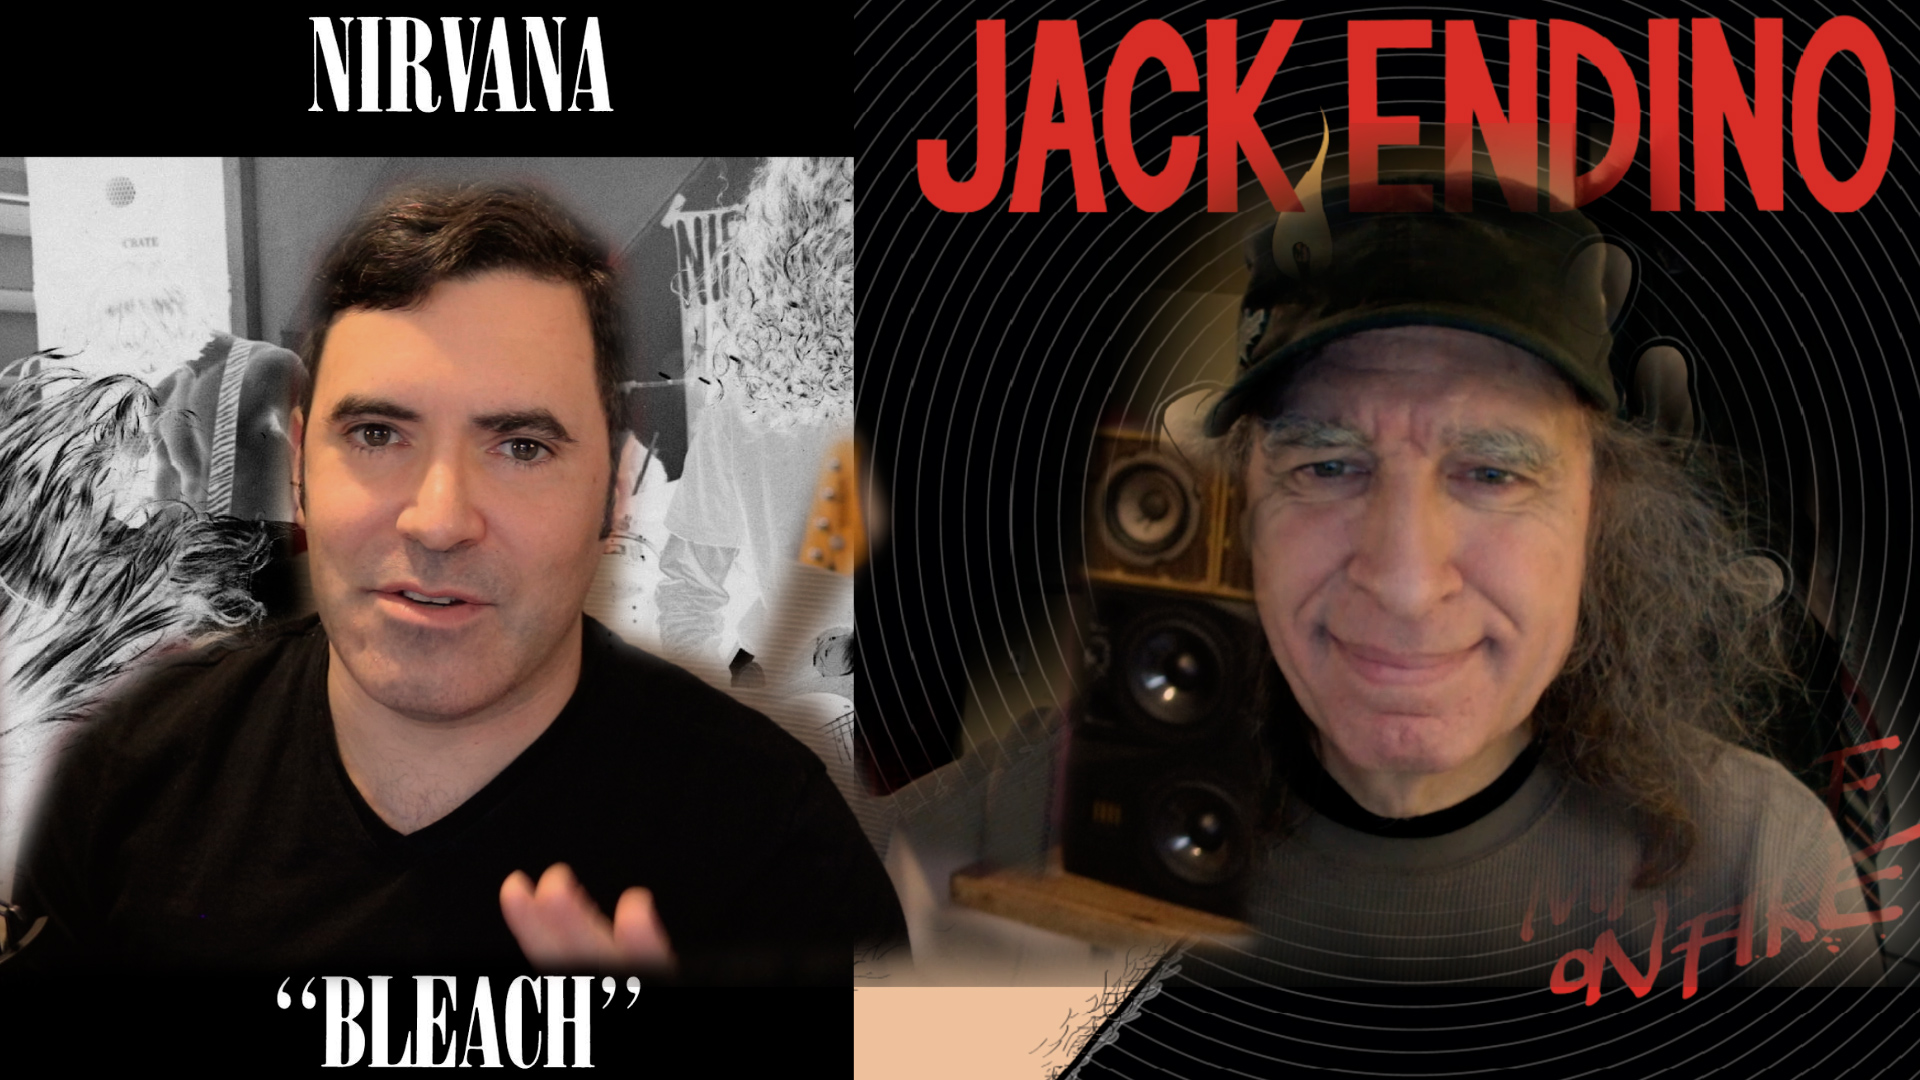 Legendary Grunge Producer Jack Endino on Recording, Mixing, Mastering and “Setting Himself on Fire”